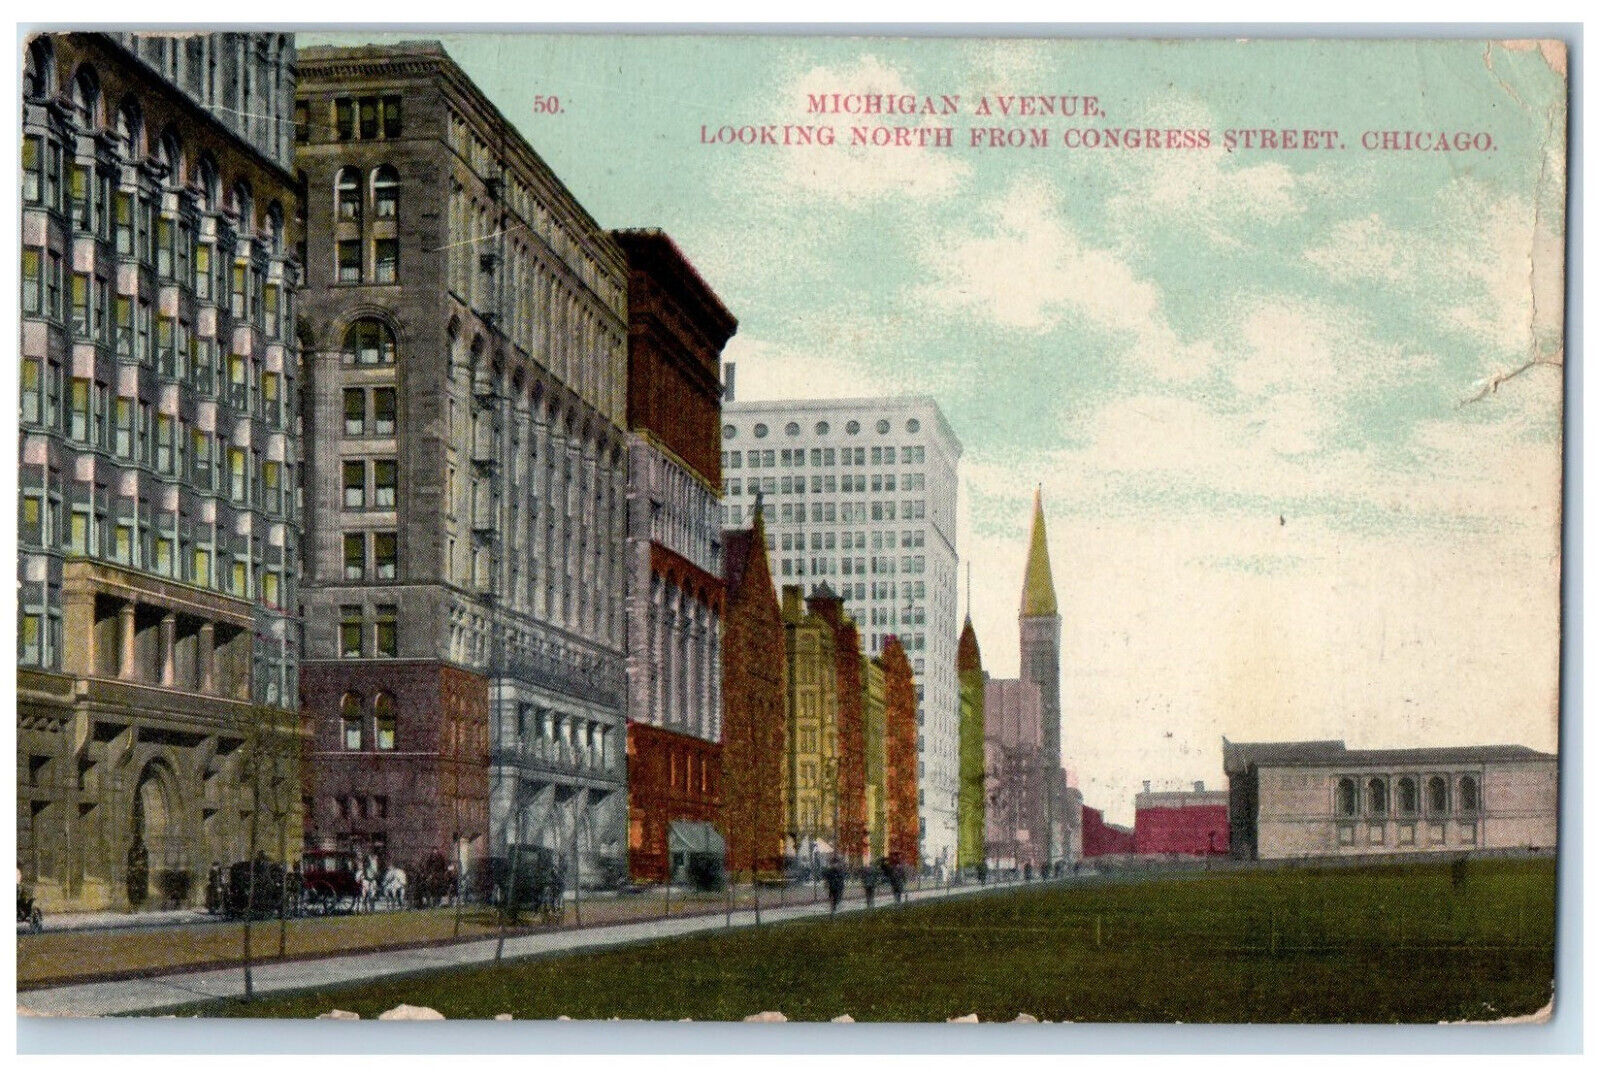 1911 Looking North From Congress Street Michigan Avenue Chicago IL Postcard